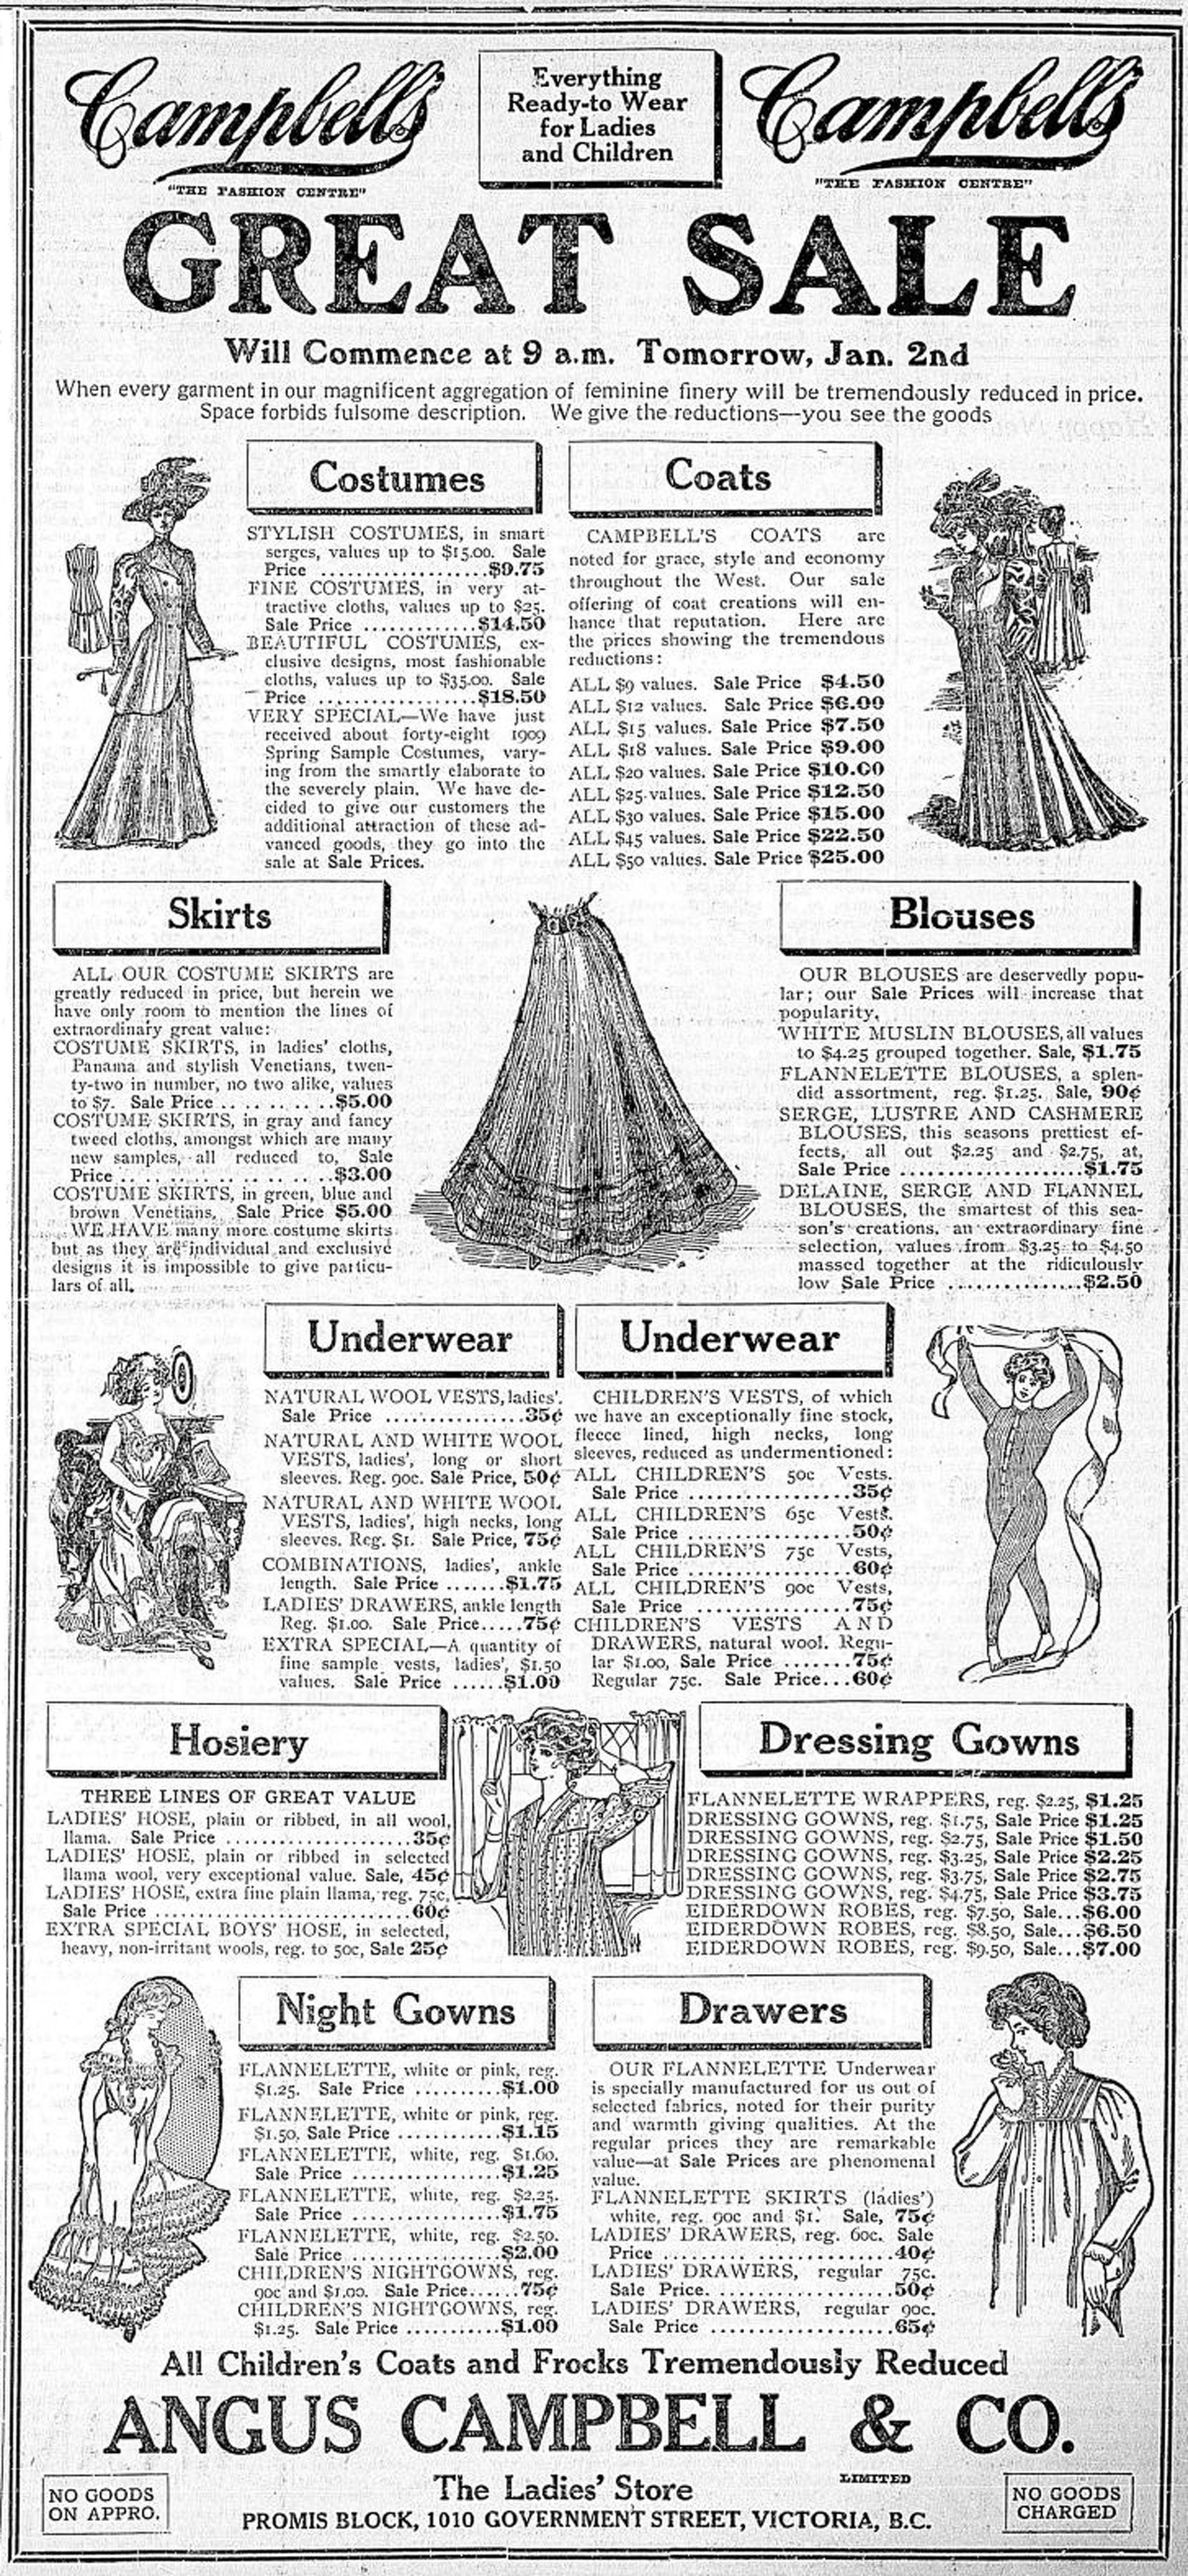 1909 advertisement for Angus Campbell & Co., a women's clothing store located at 1010 Government Street for several decades. (Victoria Online Sightseeing Tours collection)